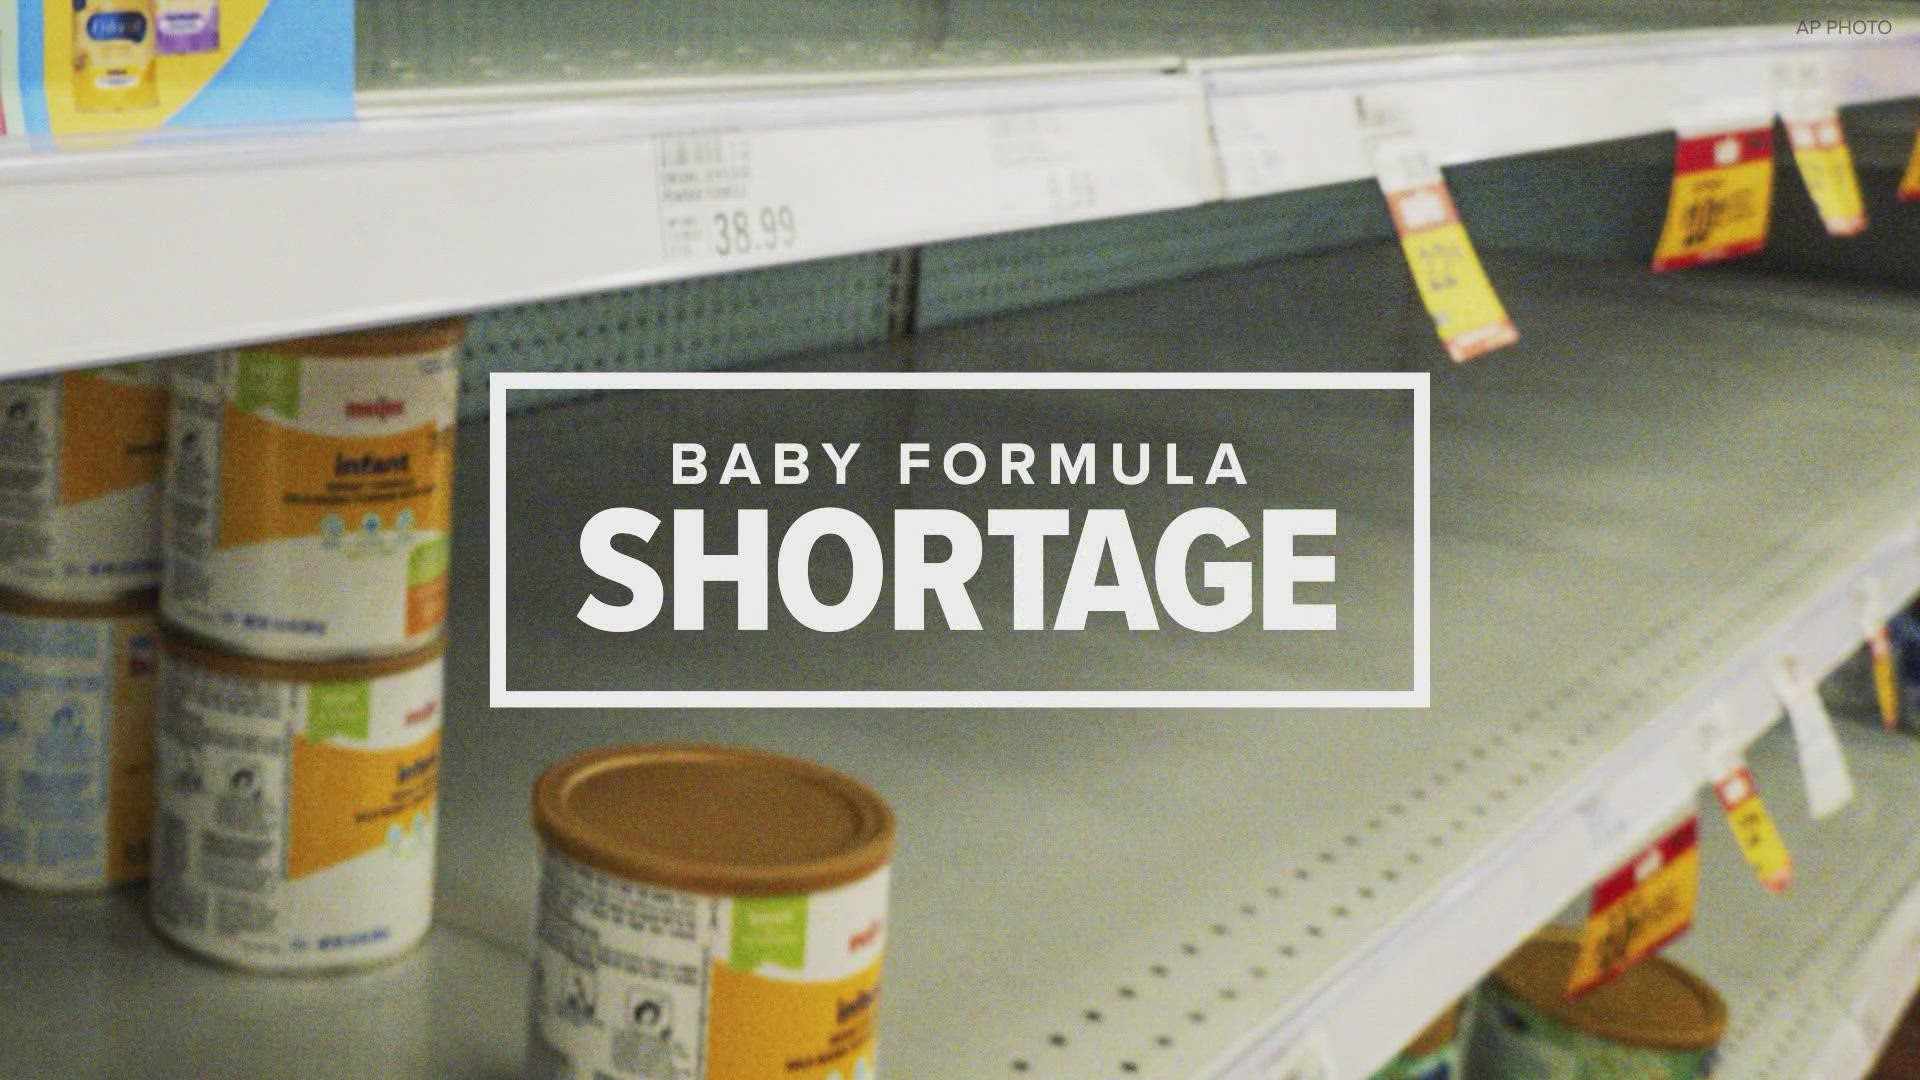 The nationwide infant formula shortage has caused stress for many families. Here is what you can do if you've been impacted.